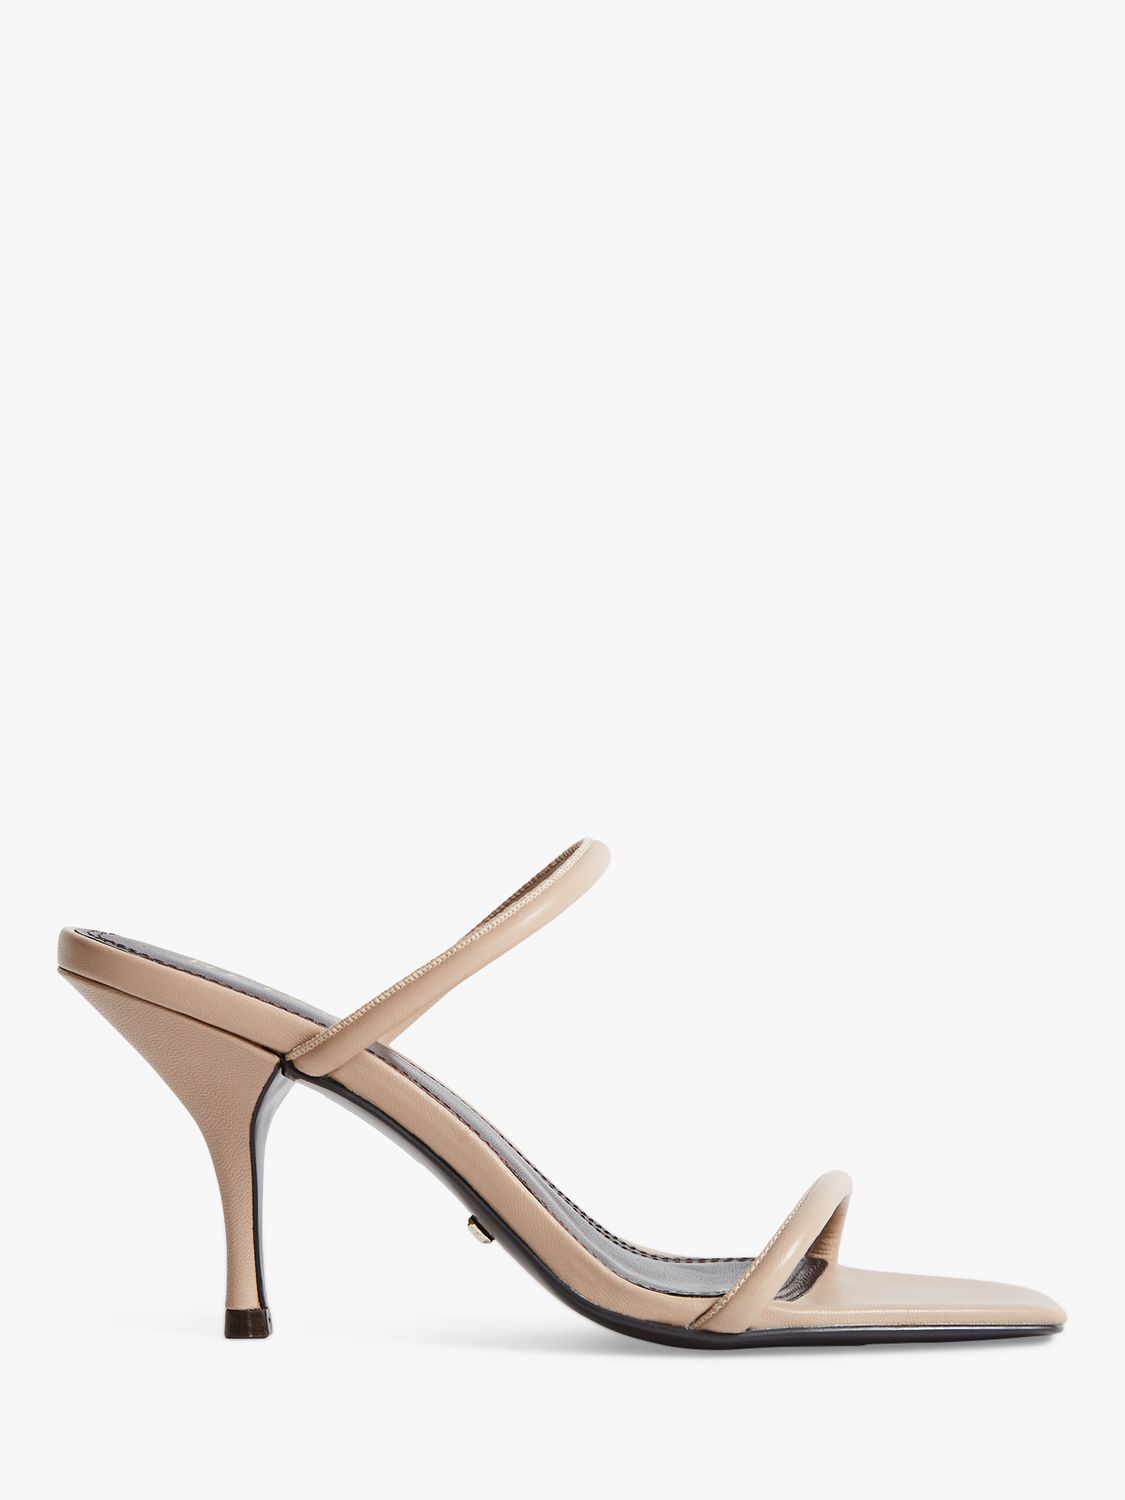 Reiss Magda Leather Strappy Heeled Sandals, Nude at John Lewis & Partners